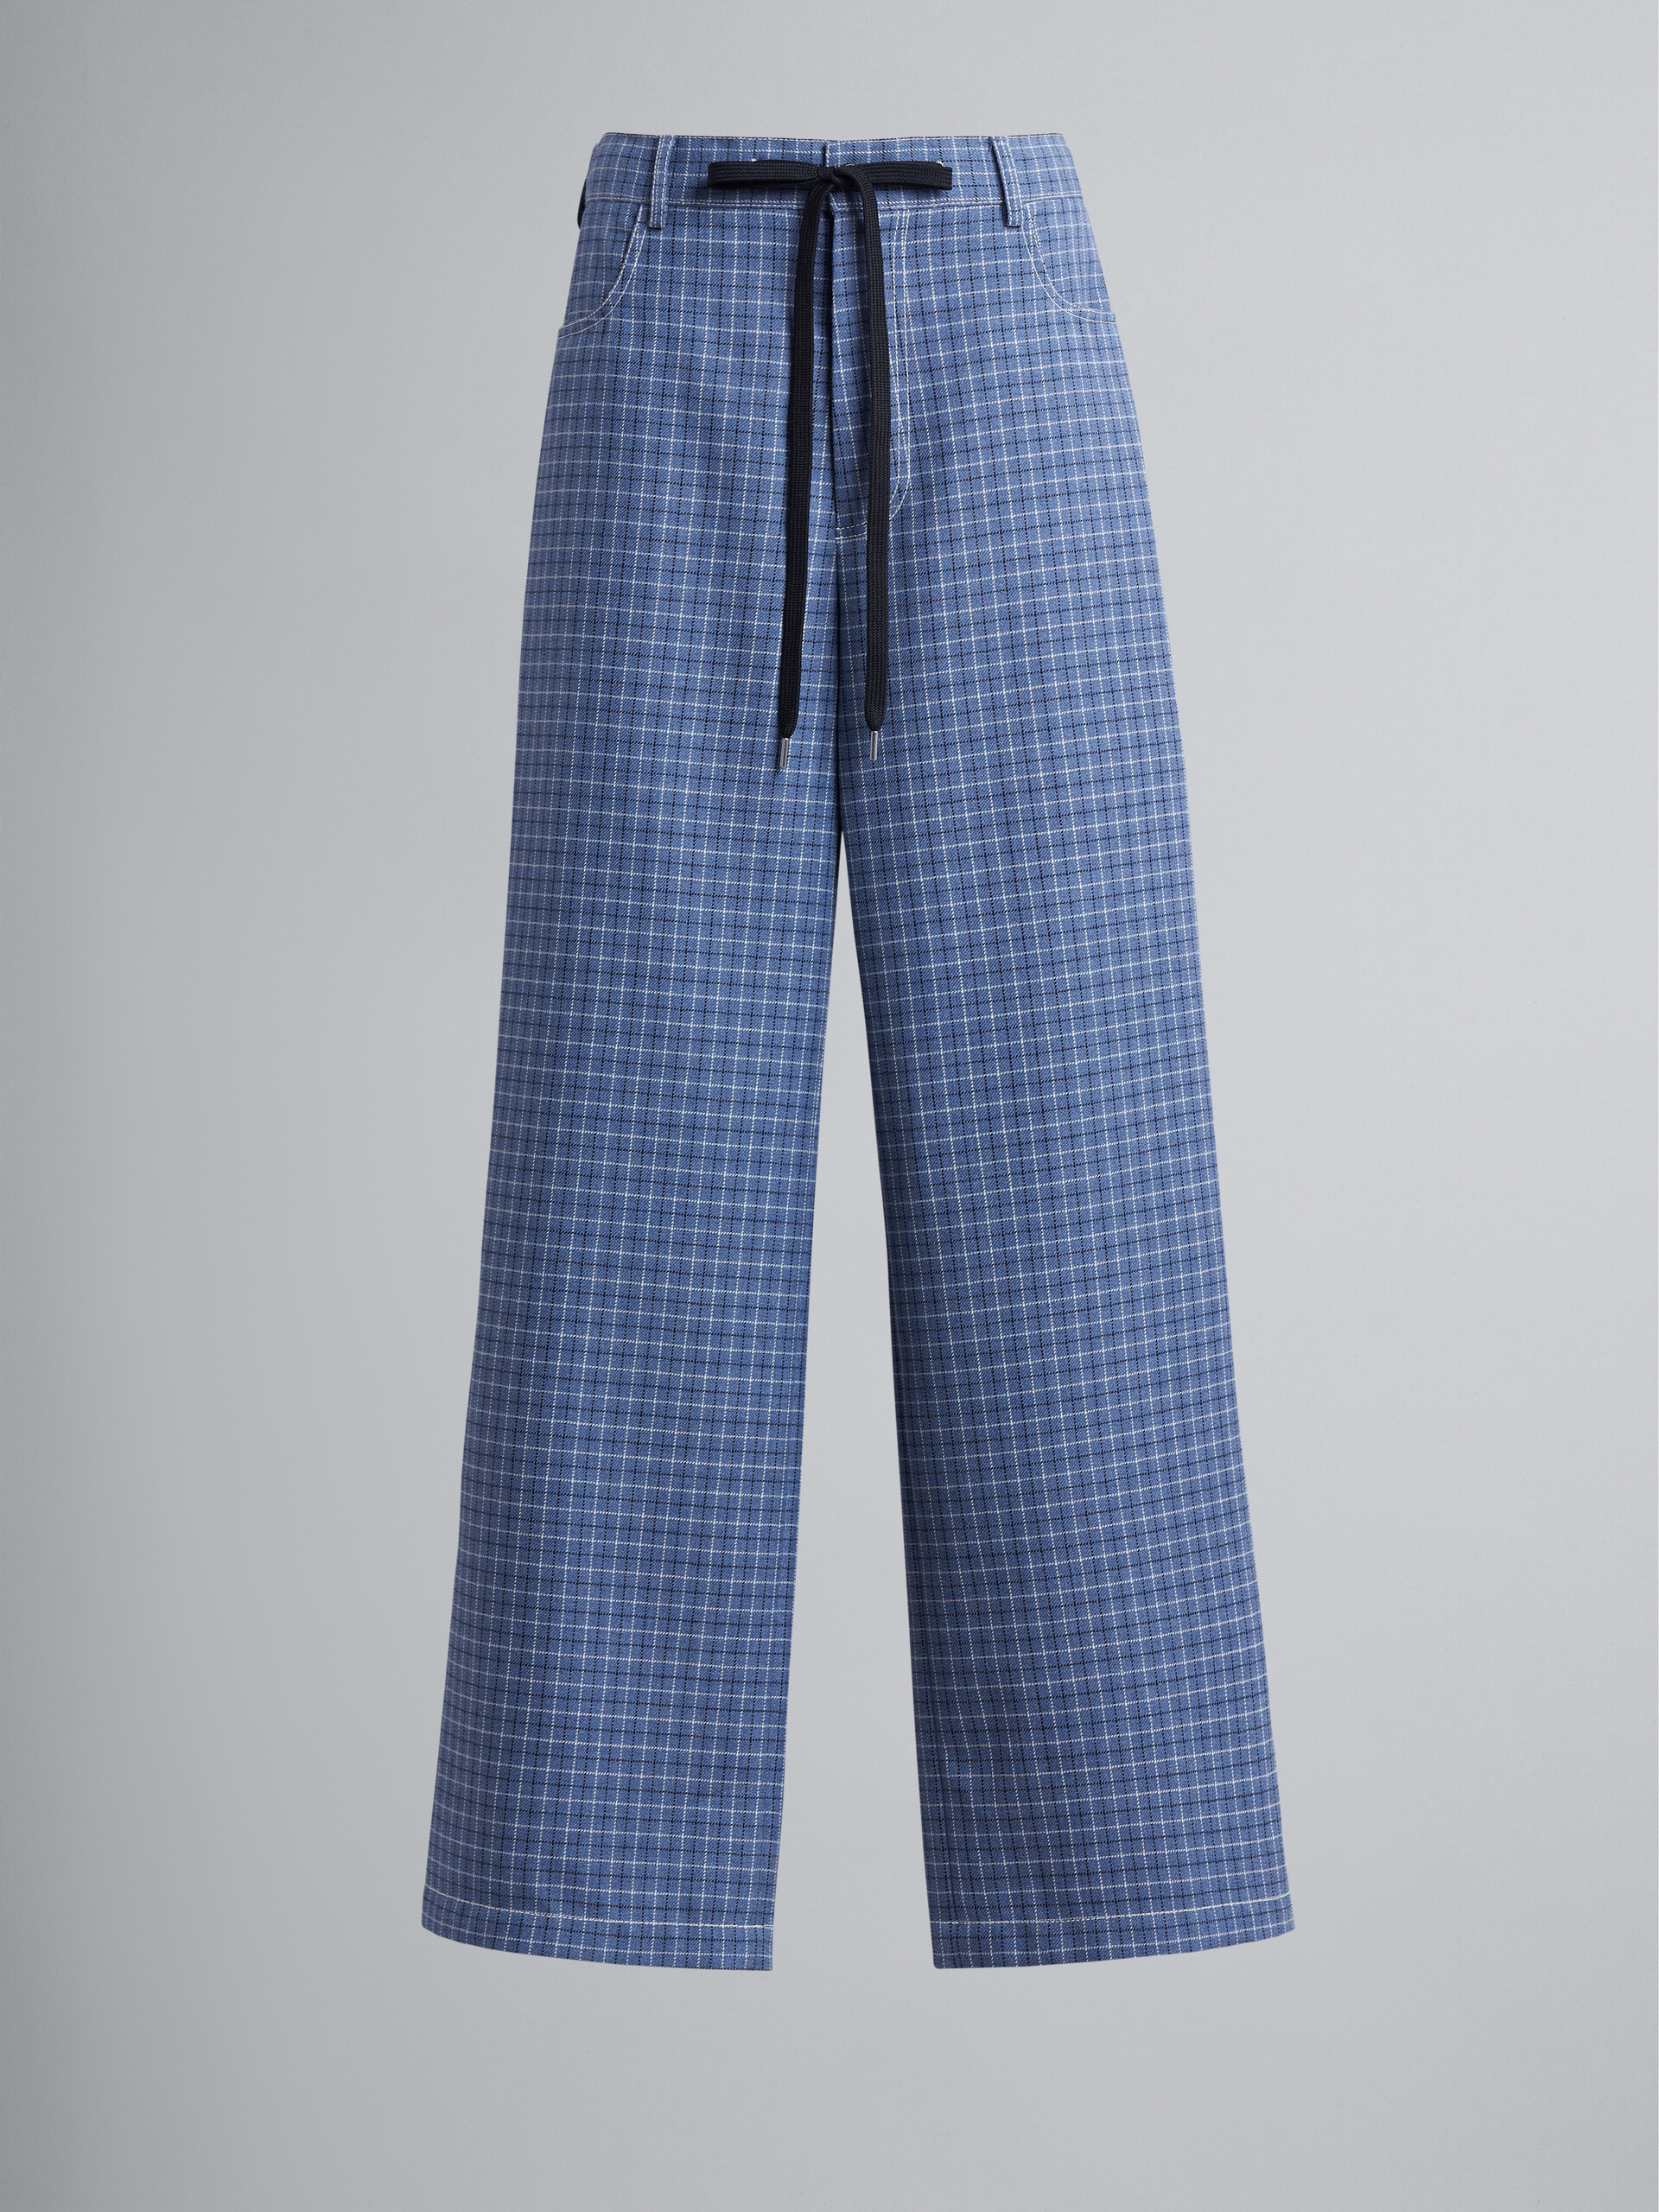 Check wool trousers - Pants - Image 1